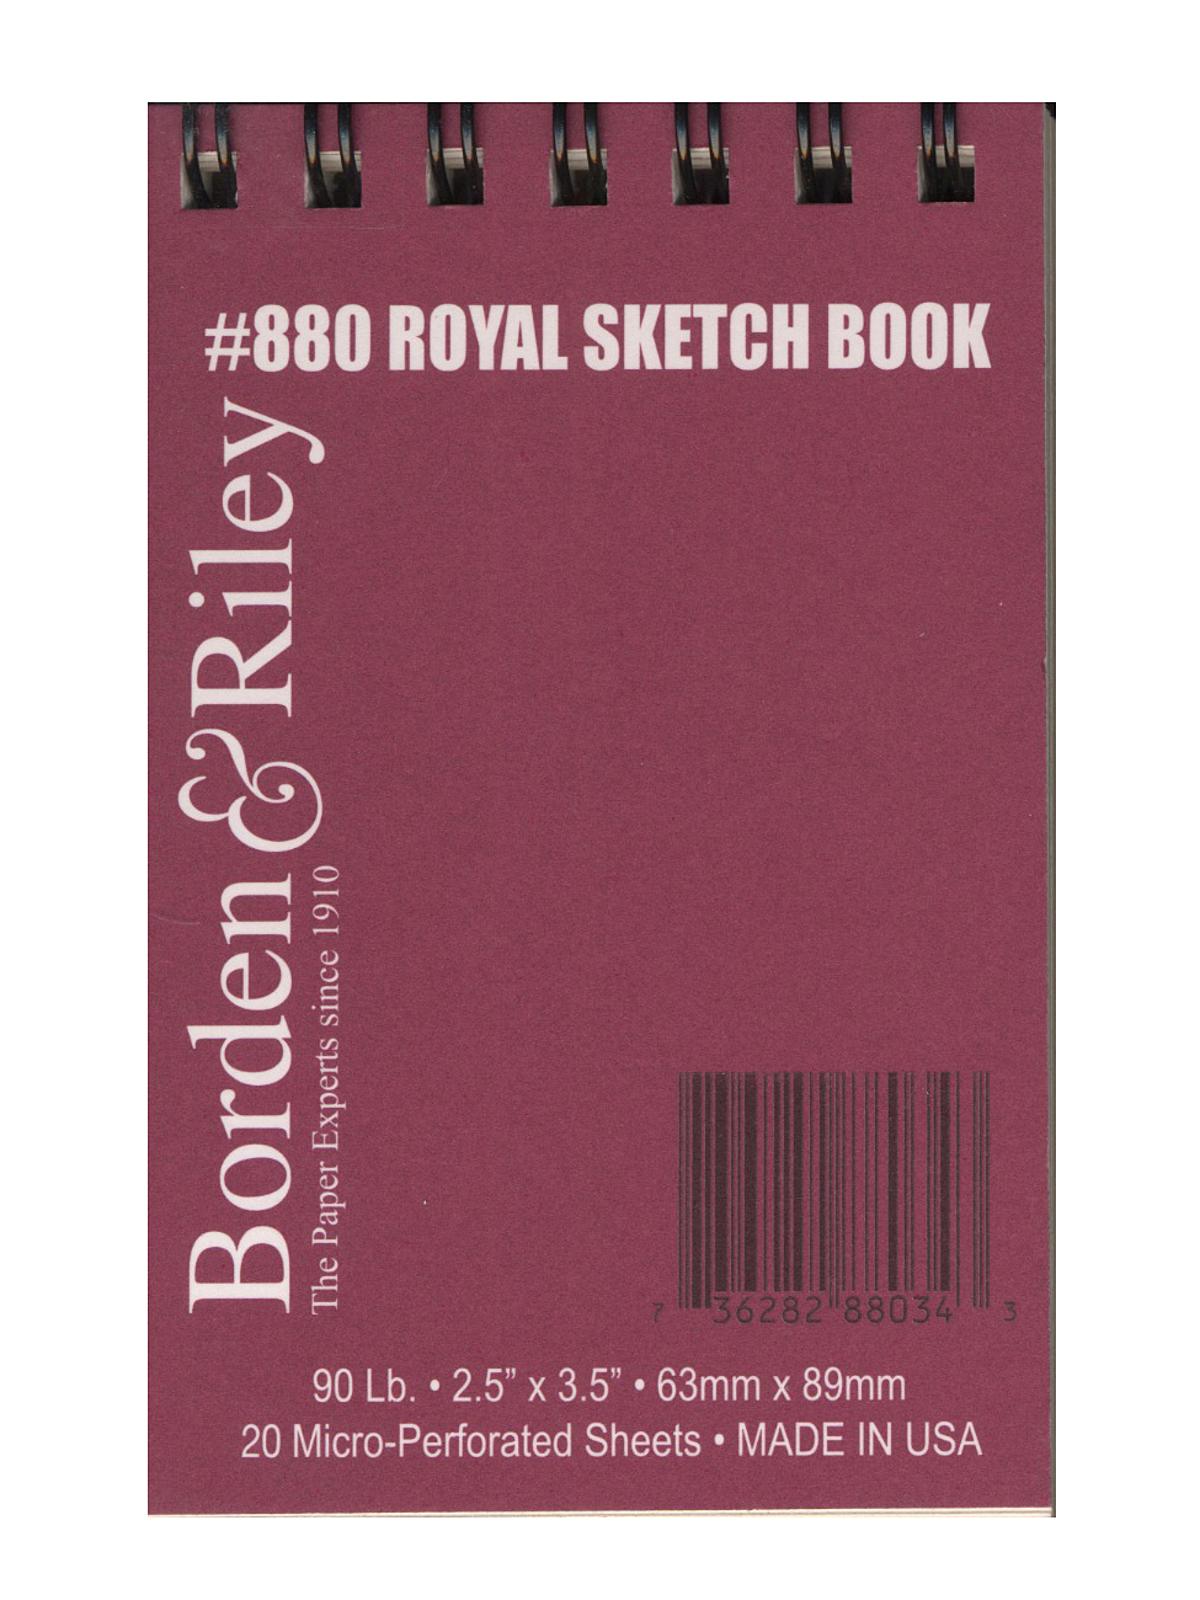 #880 Royal Sketch Paper 2 1 2 In. X 3 1 2 In. Pad 20 Sheets